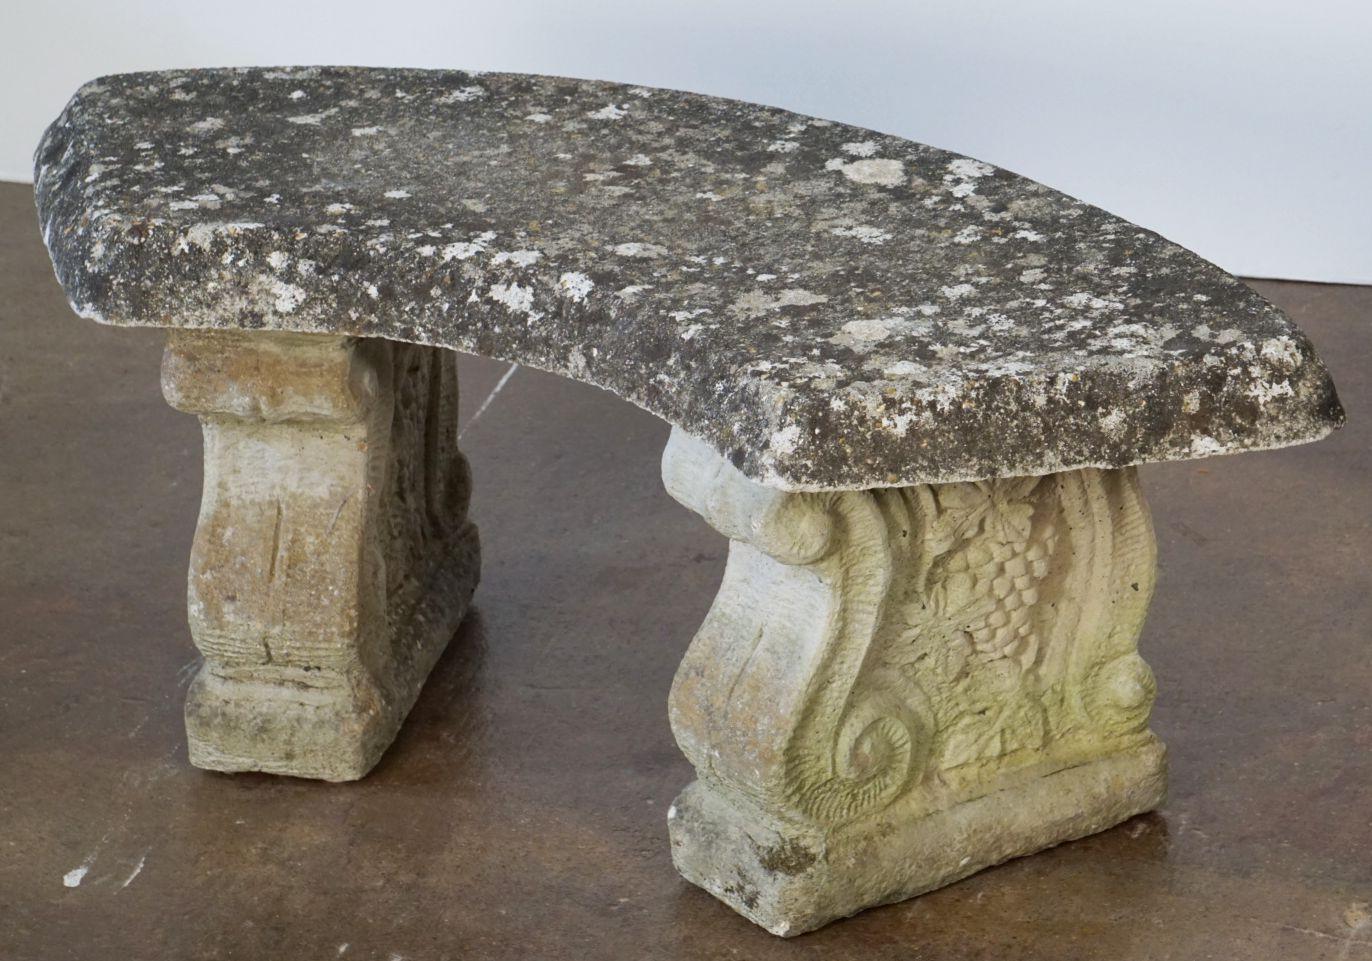 A fine English garden bench or seat of composition stone, featuring a curved top (39 1/2 inches length), set upon two plinth supports with a scroll and grape relief design.

Note: The depth of the curved seat is 15 inches - the overall depth from